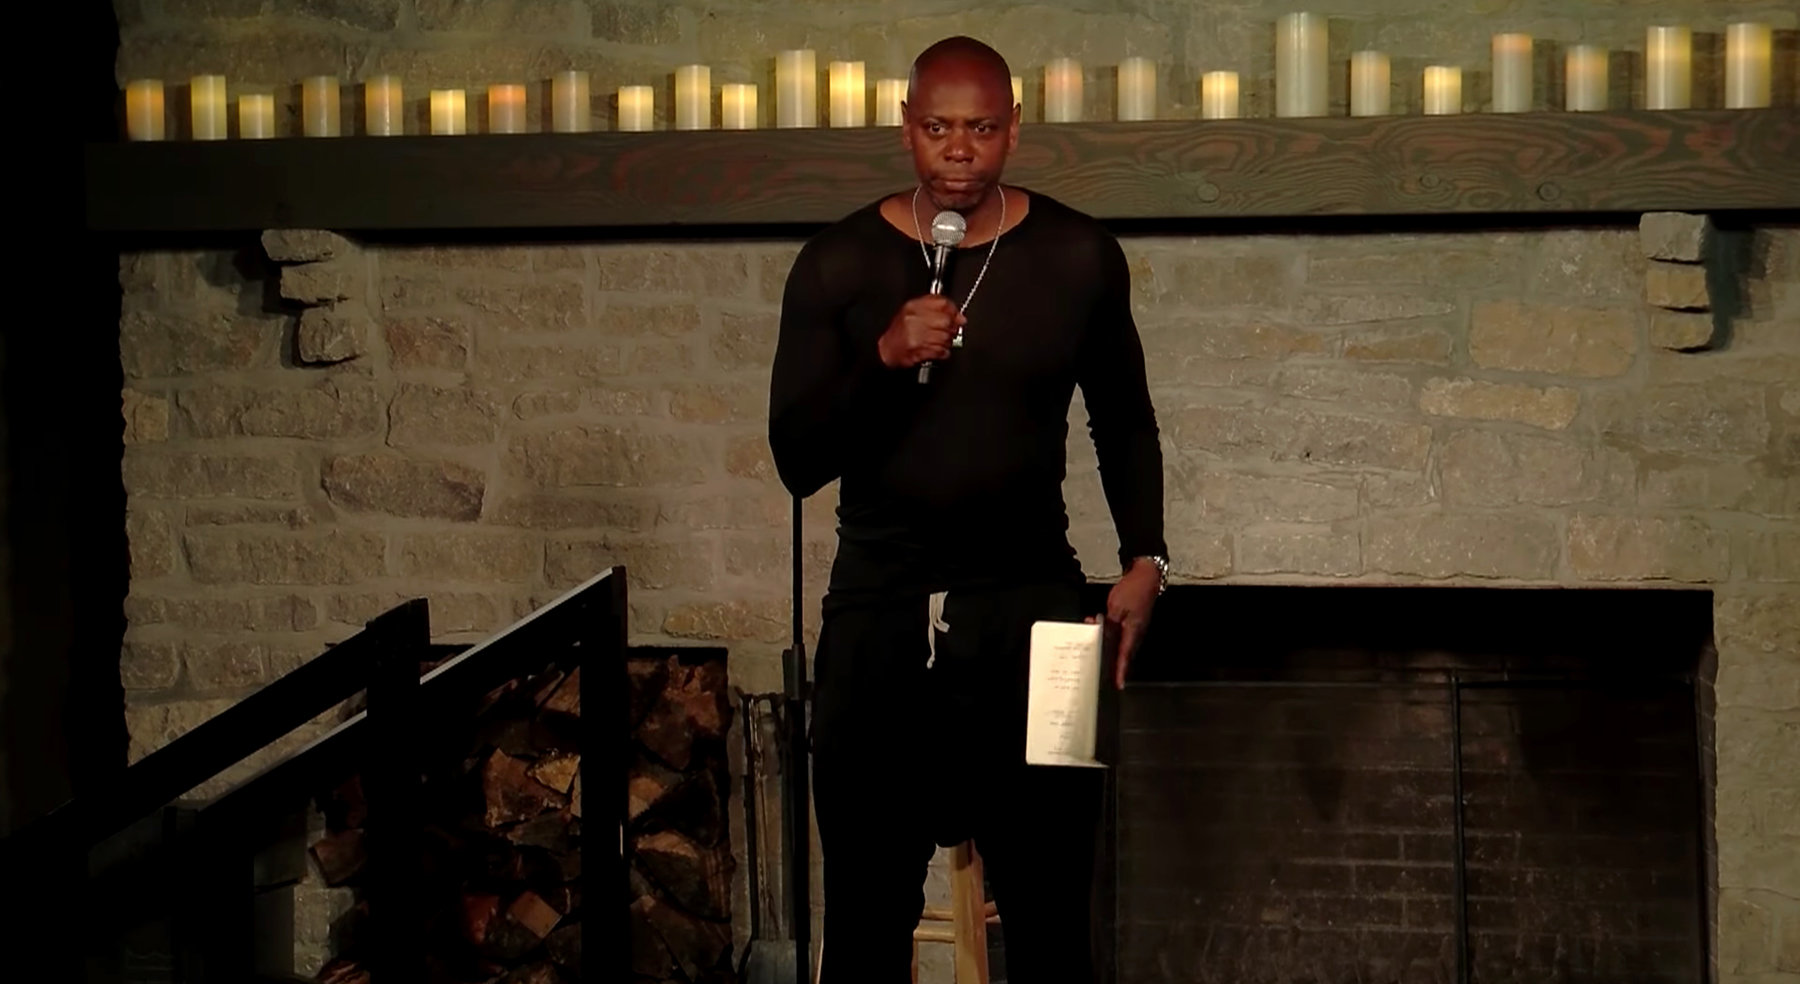 Dave Chappelle Debunks Cancel Culture, Seemingly Confirms Azalea Banks Affair in Netflix Special in Honor of George Floyd